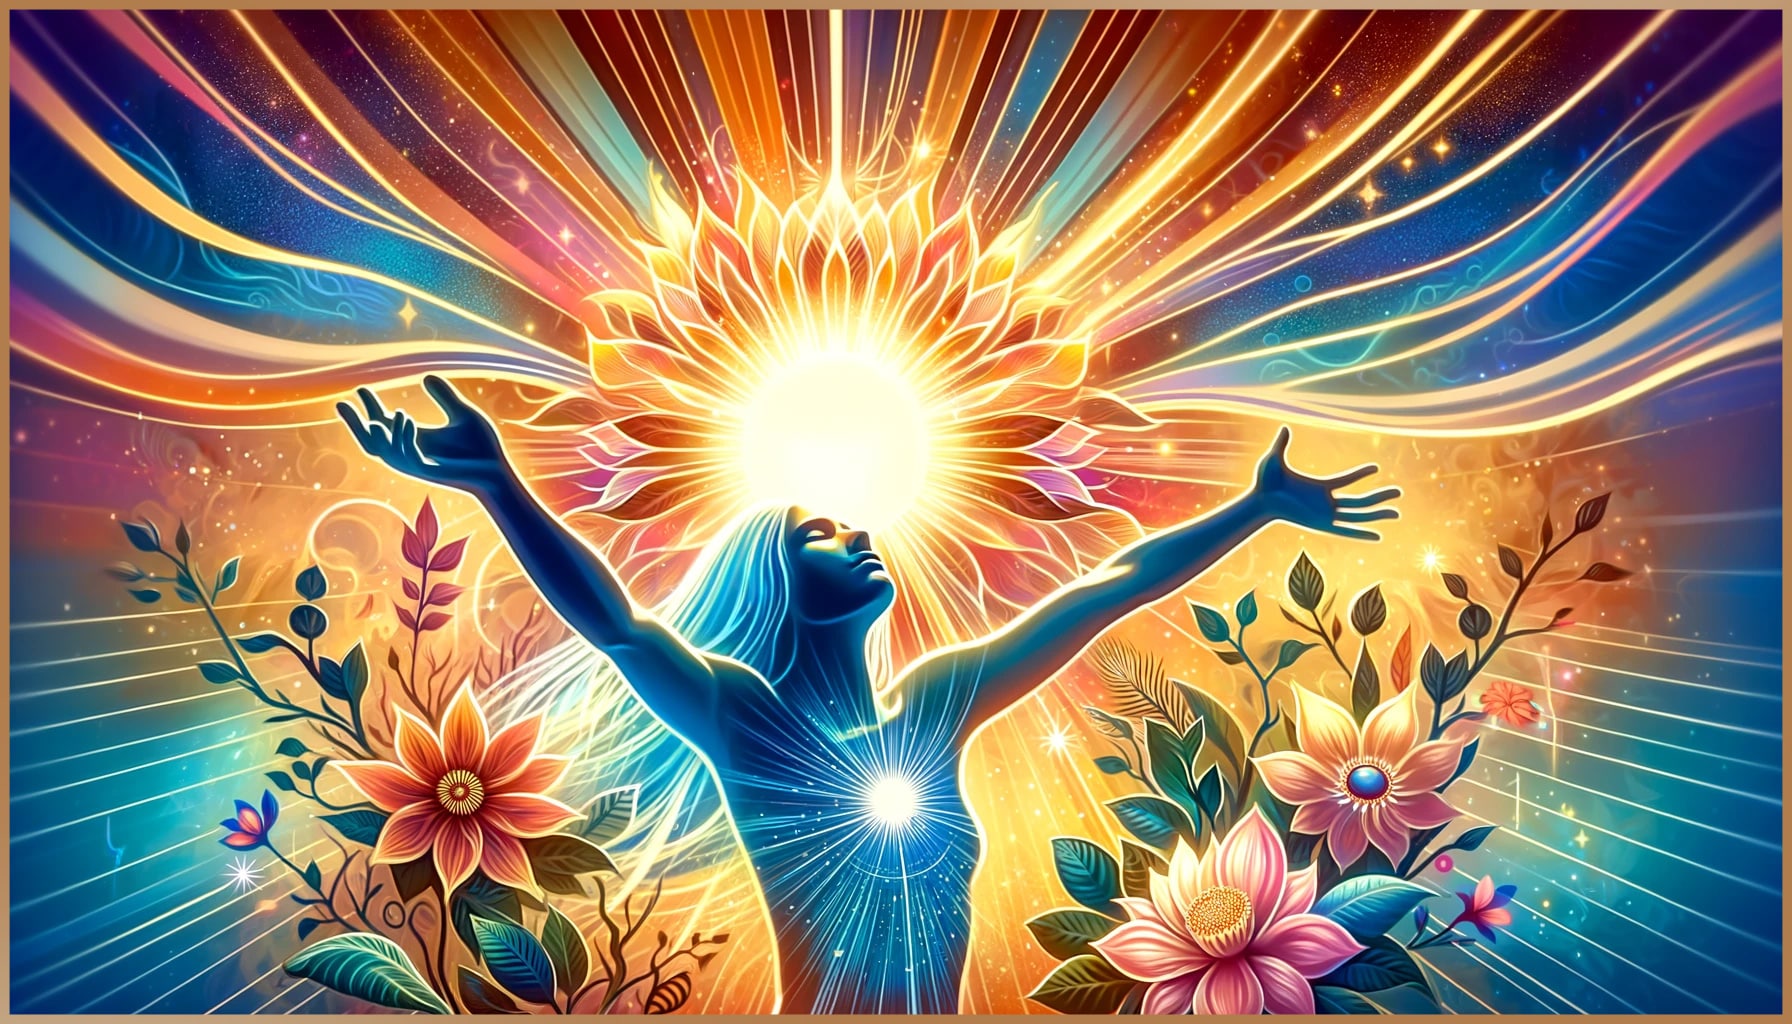 A person with arms raised, emanating radiant life energy, surrounded by nature and cosmic elements.